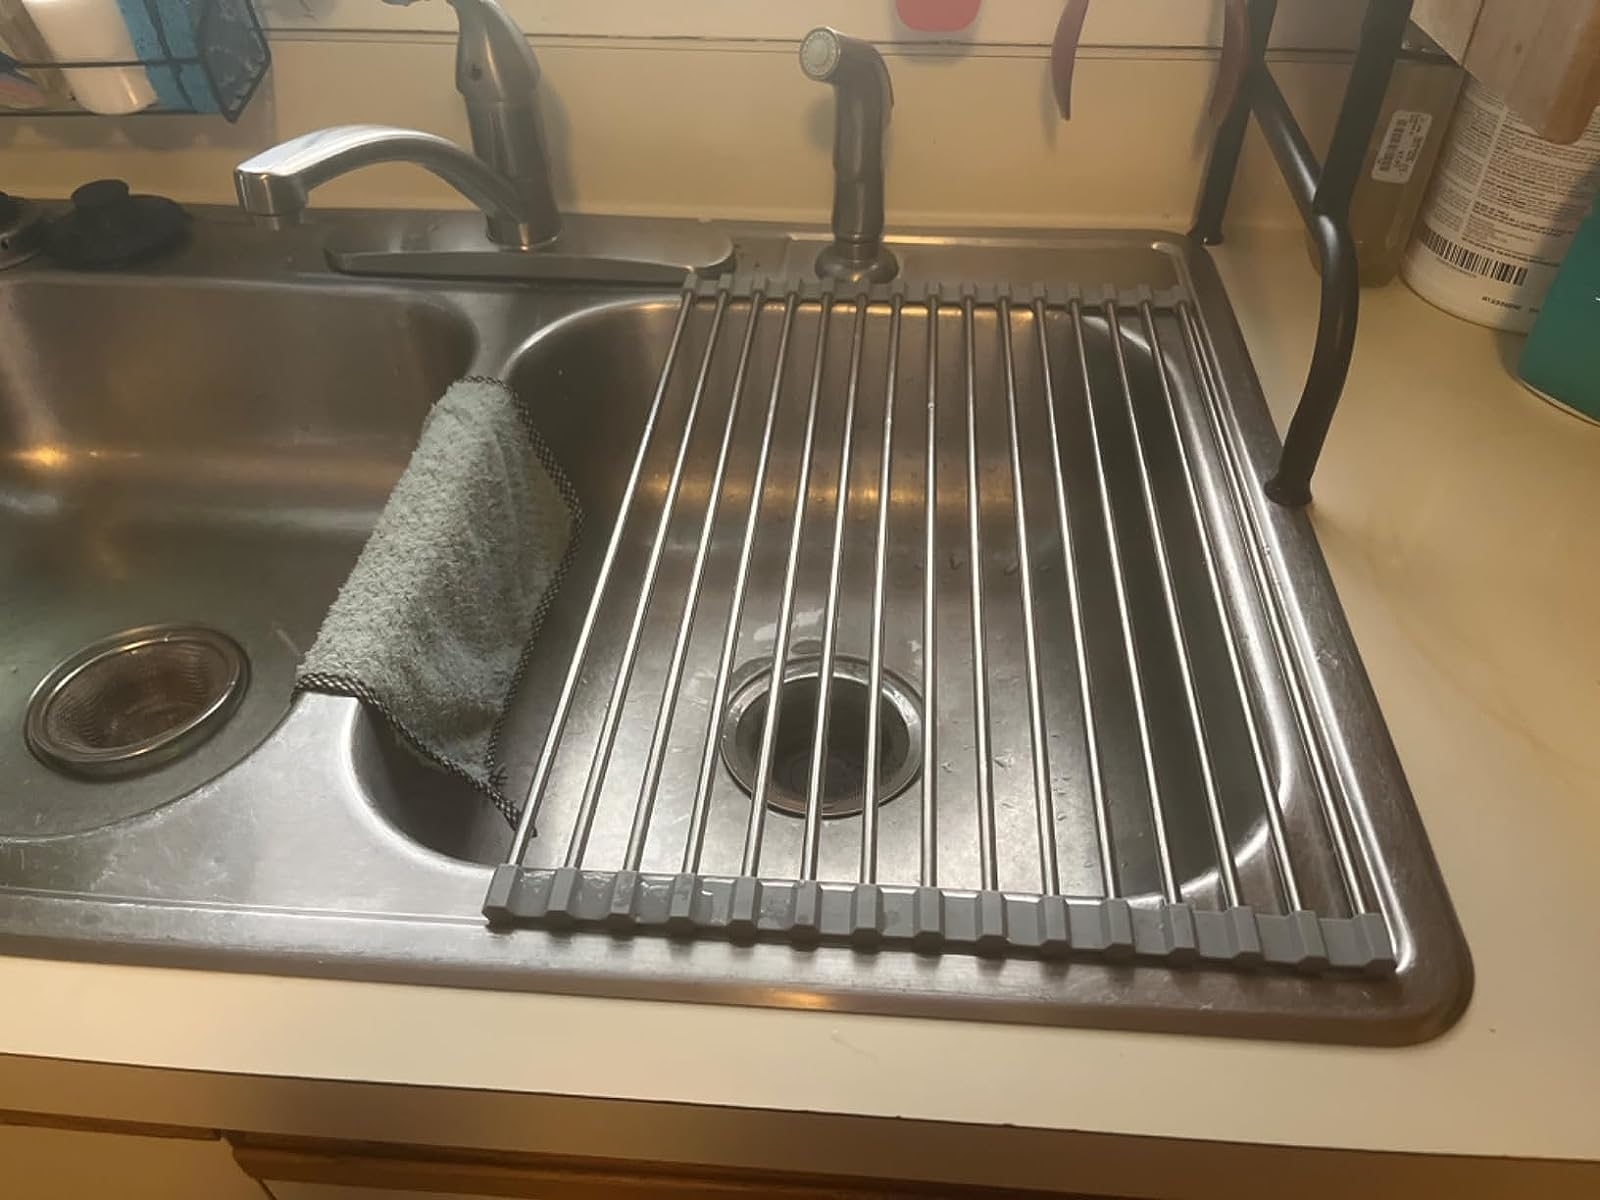 Reviewer image of the dish rack over their sink